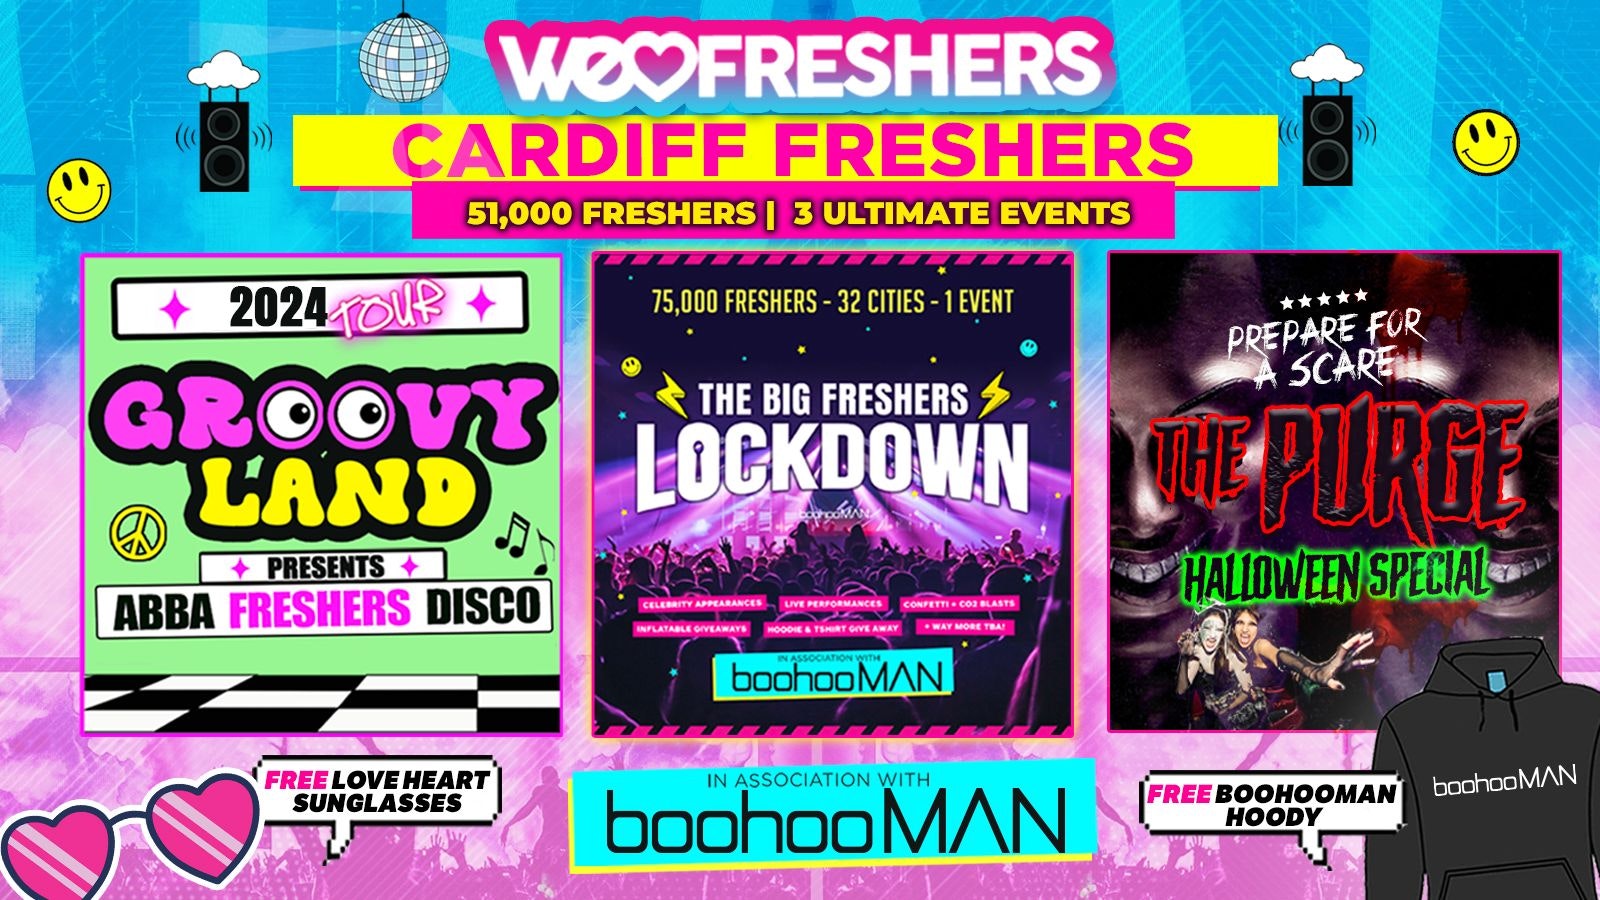 WE LOVE CARDIFF FRESHERS 2024 in association with boohooMAN ❗3 EVENTS❗